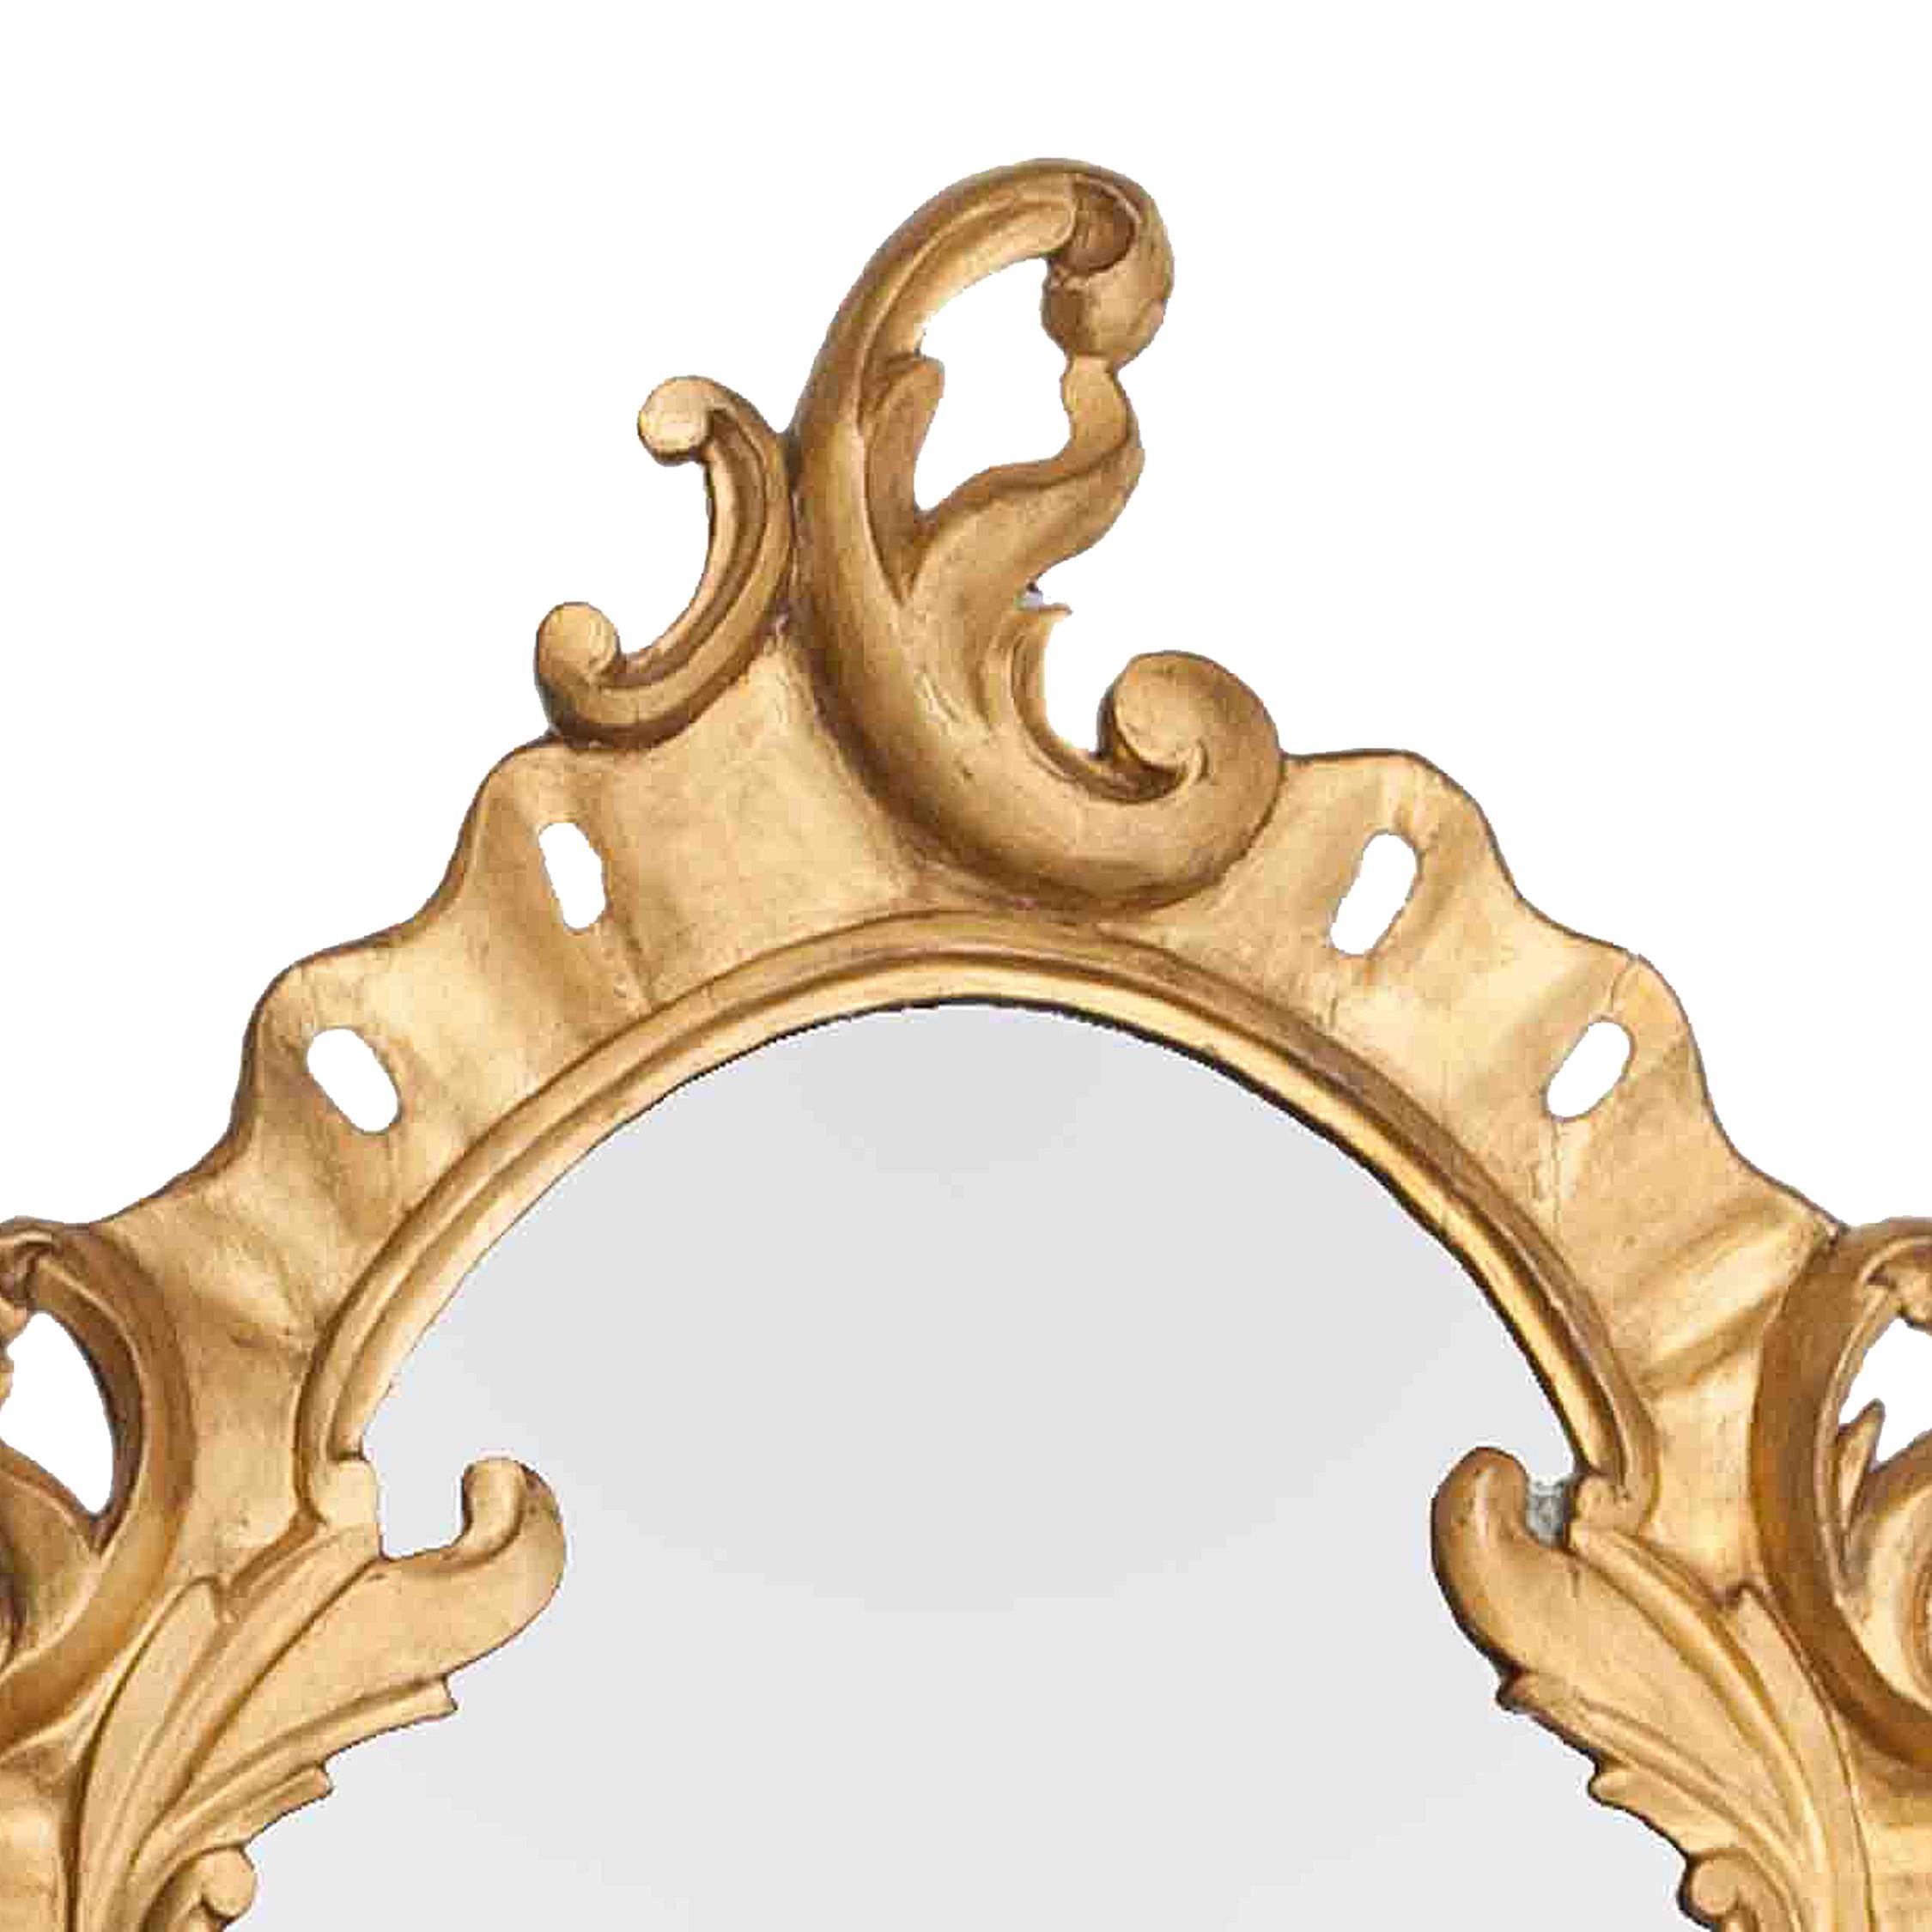 Early 19th century gilt oval mirror with C-scrolls and acanthus leaves.